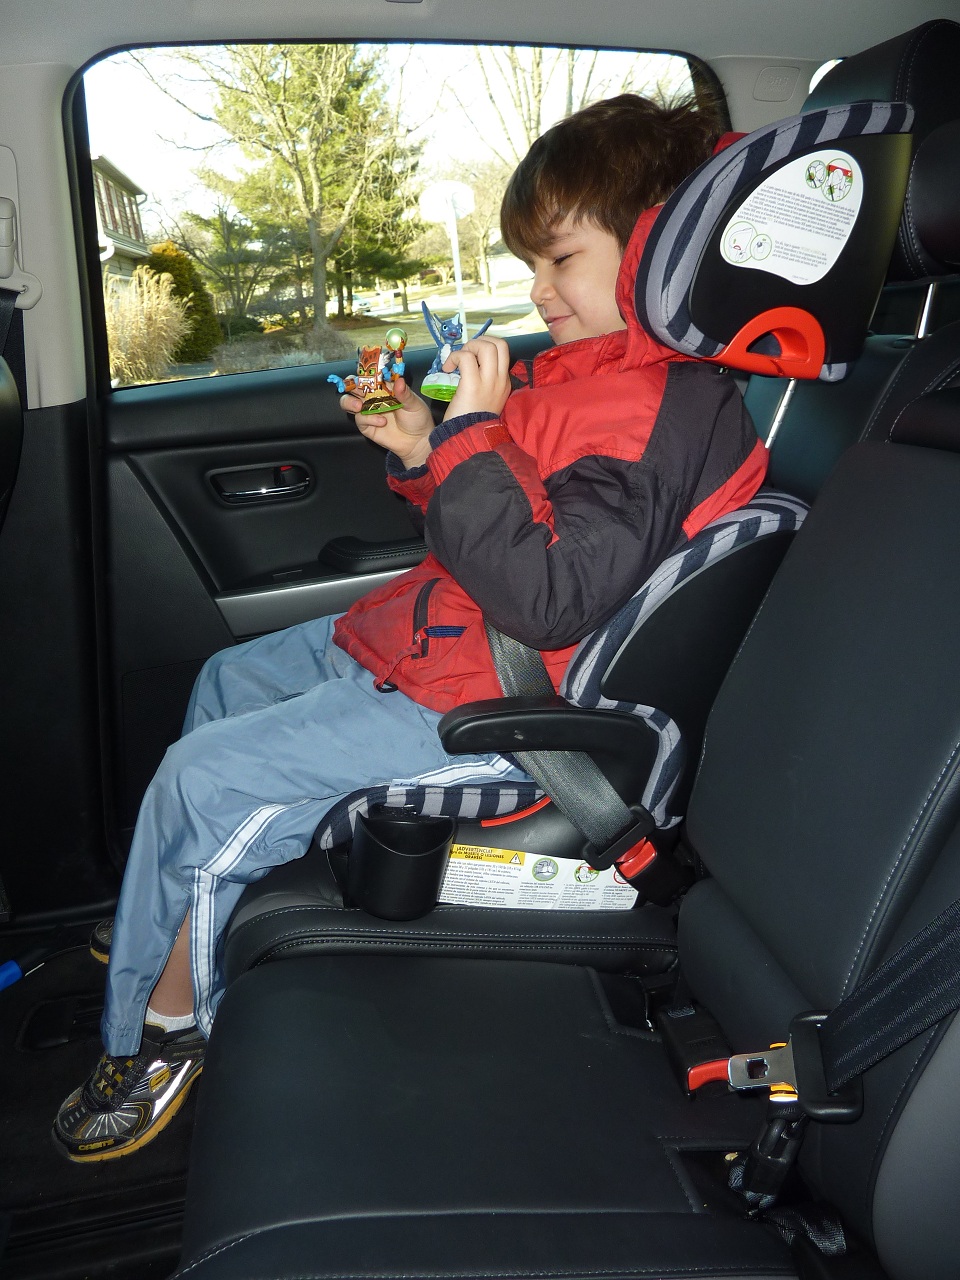 Child Car seats in CX-9 Captain's Chairs?